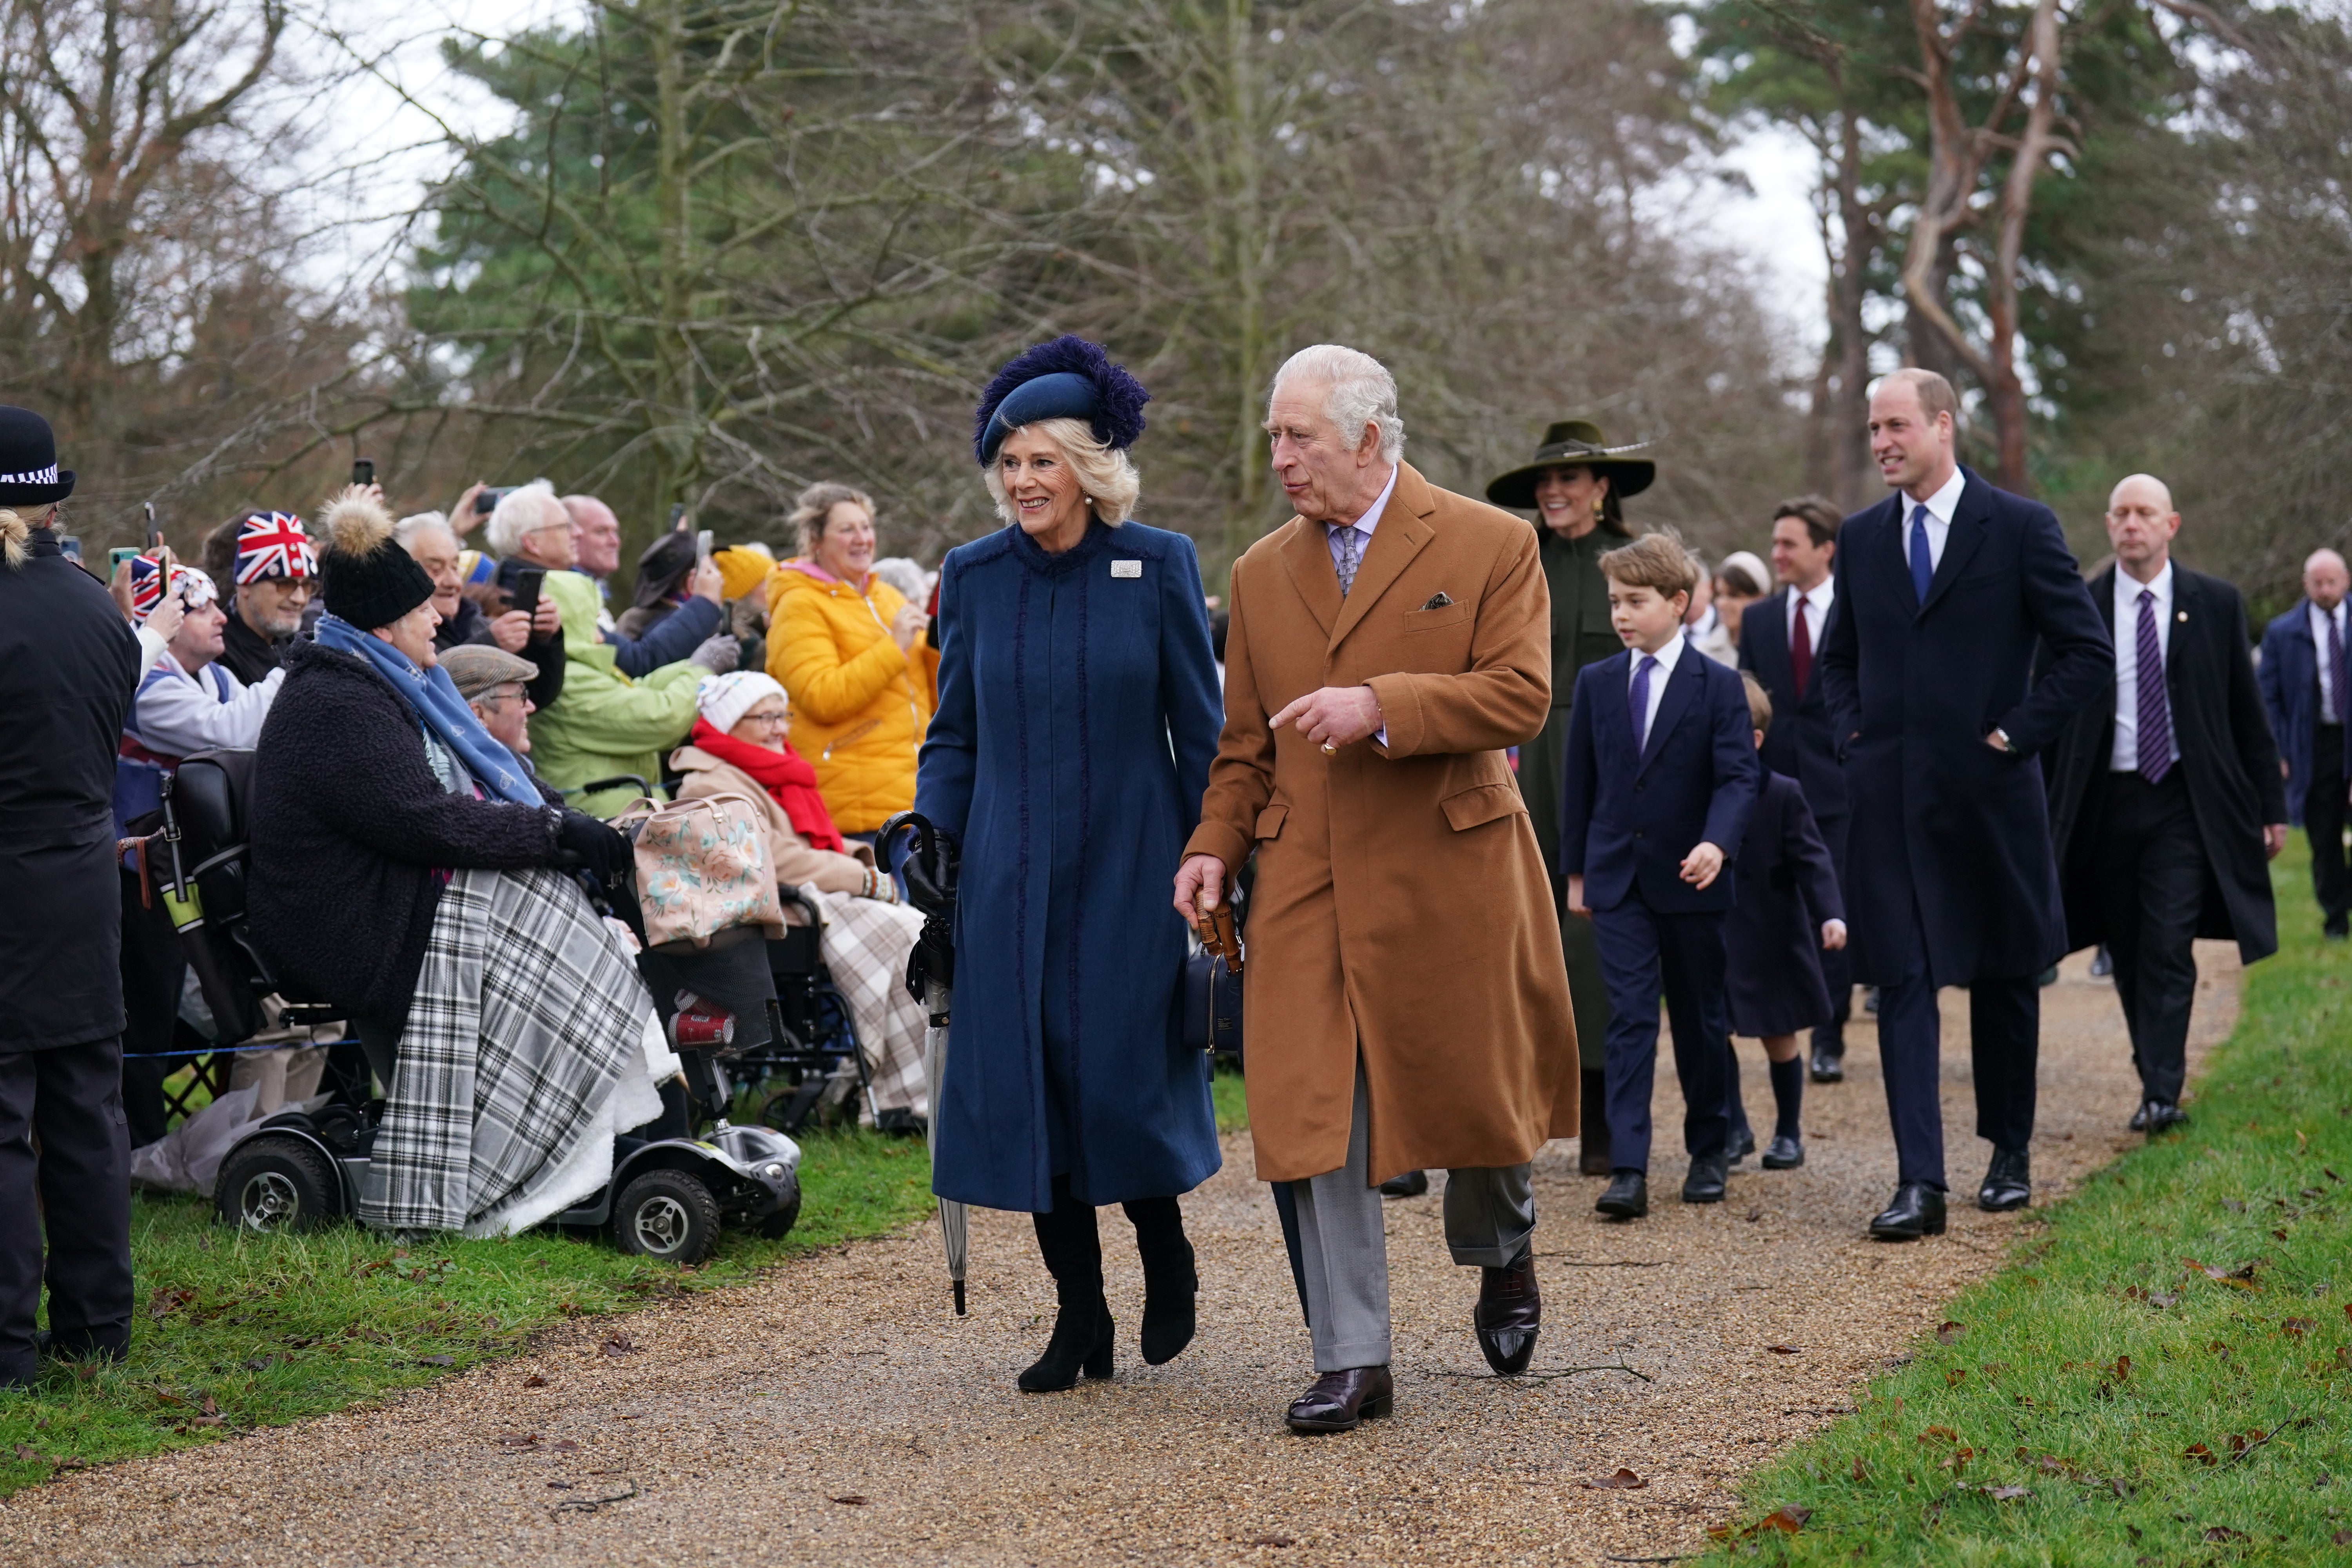 The royals at St Mary Magdalene Church in Sandringham in 2022